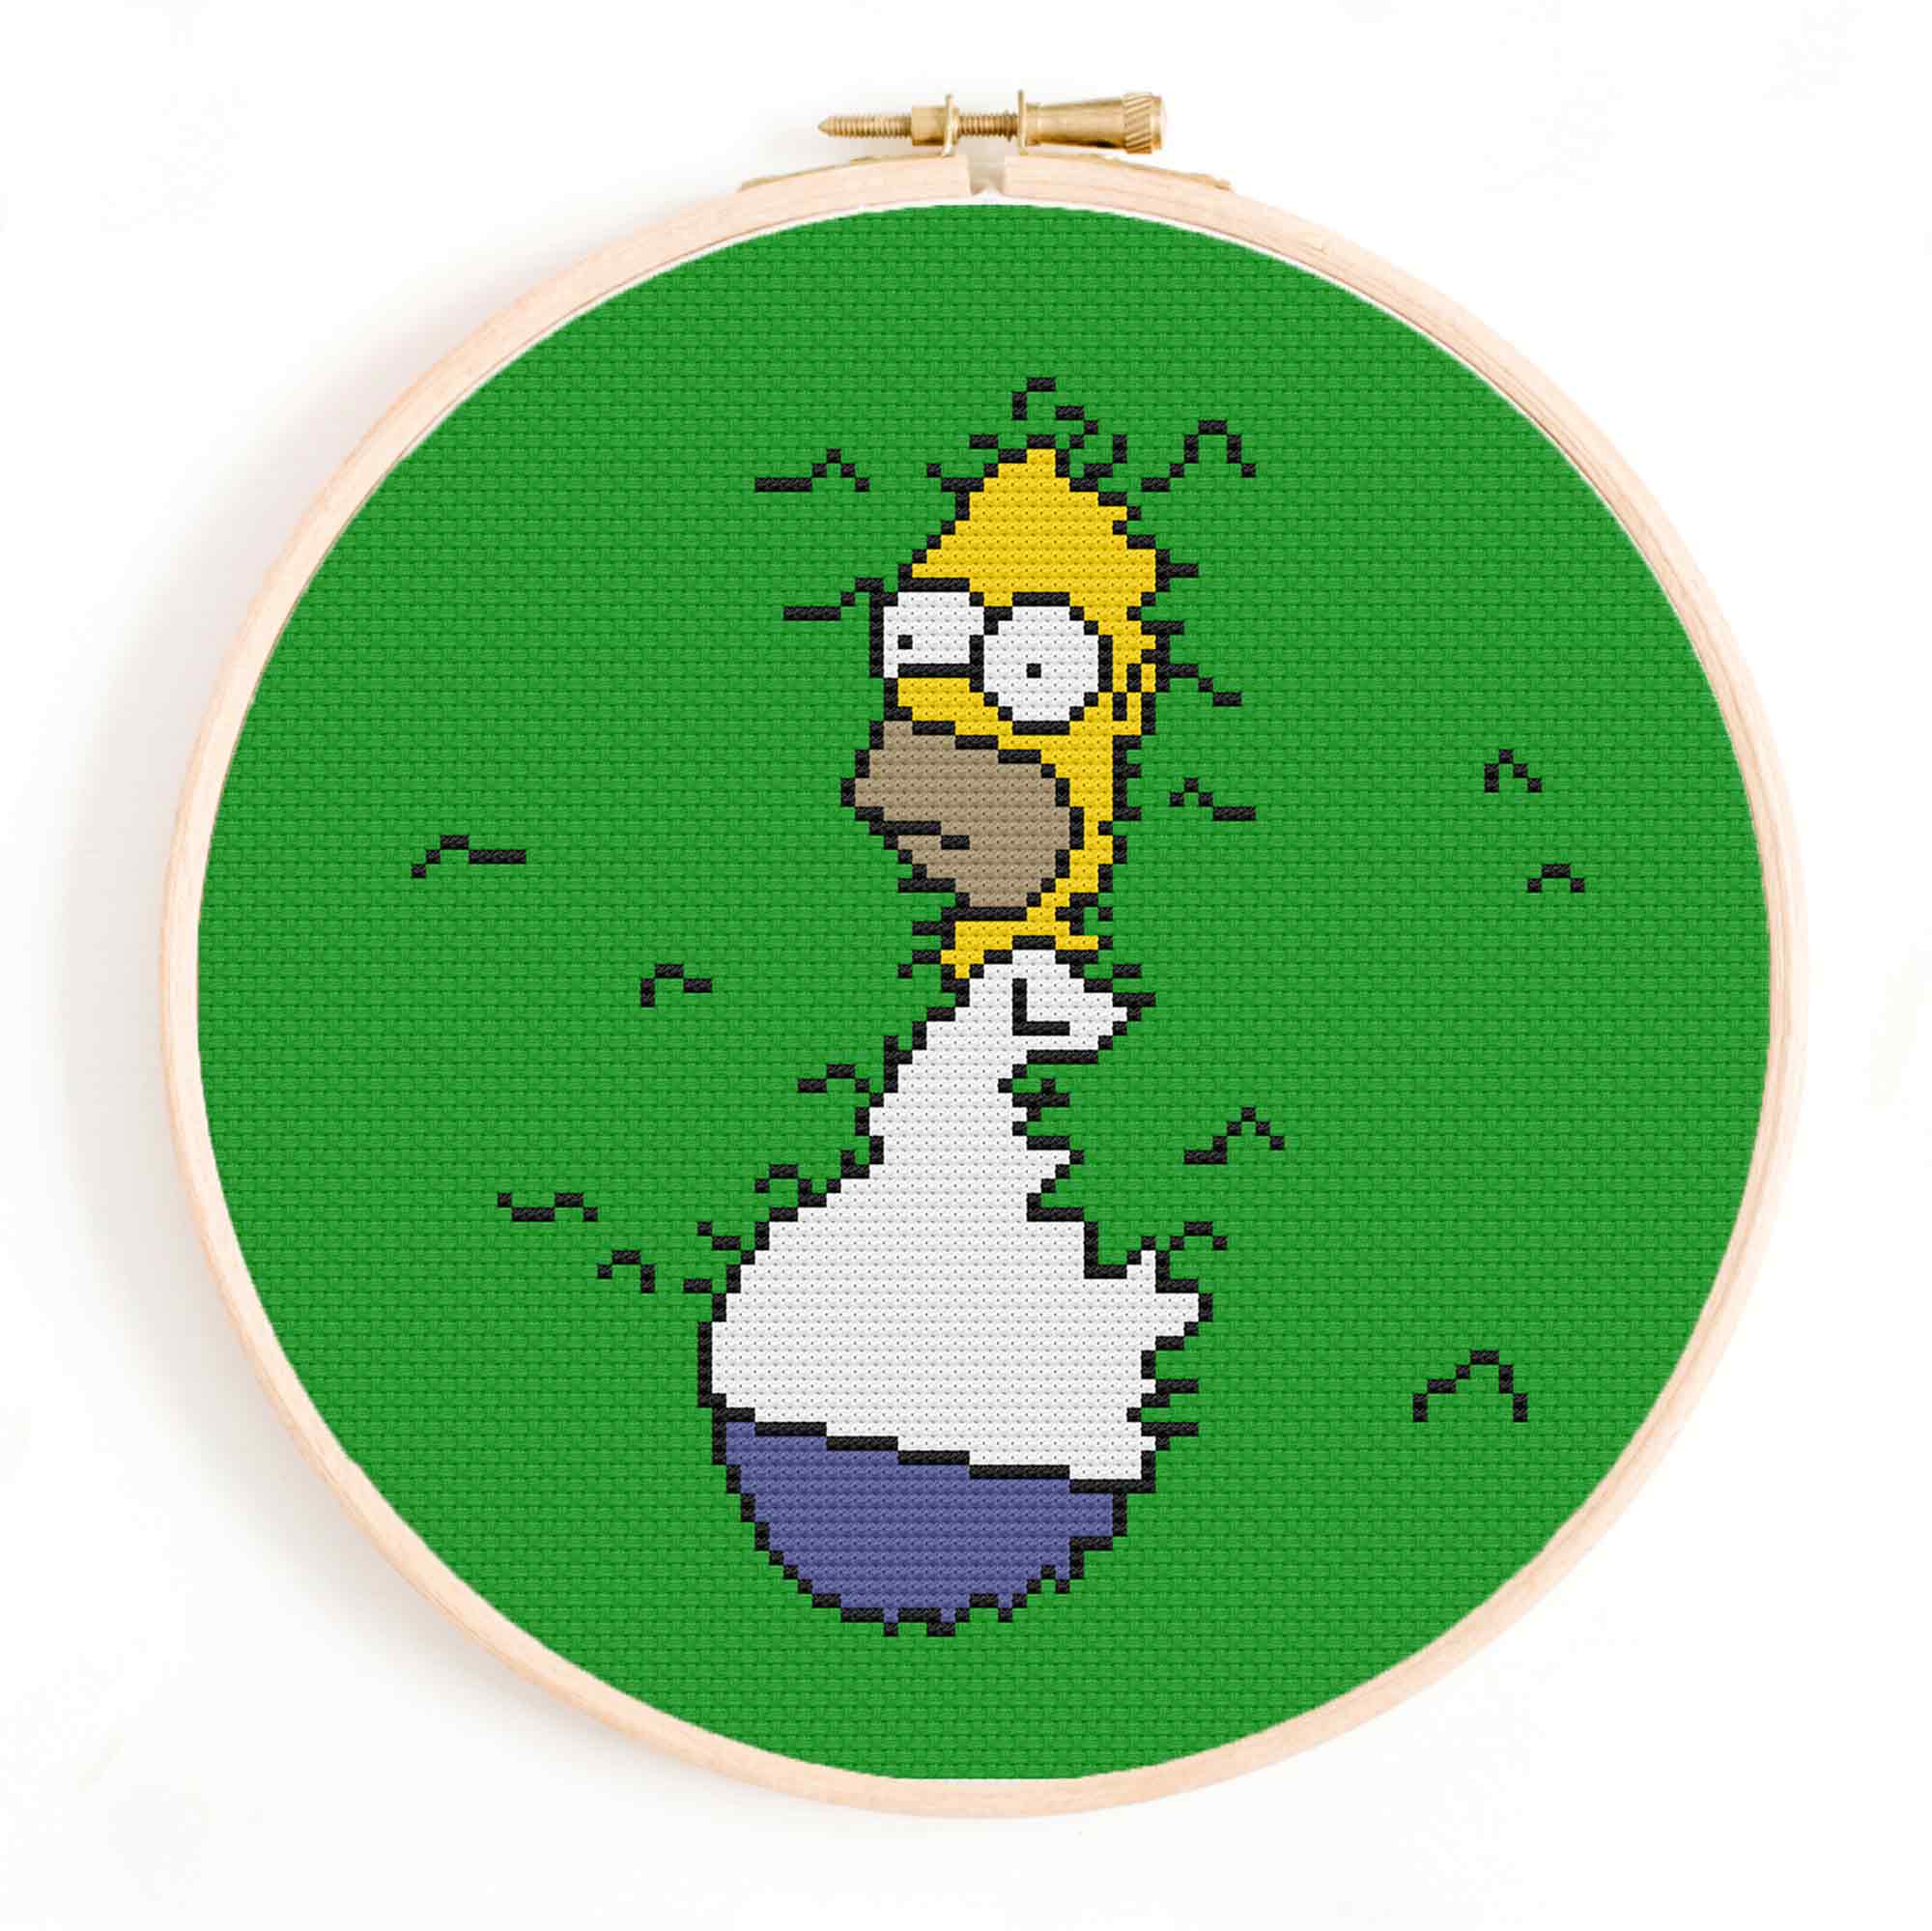 'Homer in the Bushes' The Simpsons Meme Cross Stitch Pattern